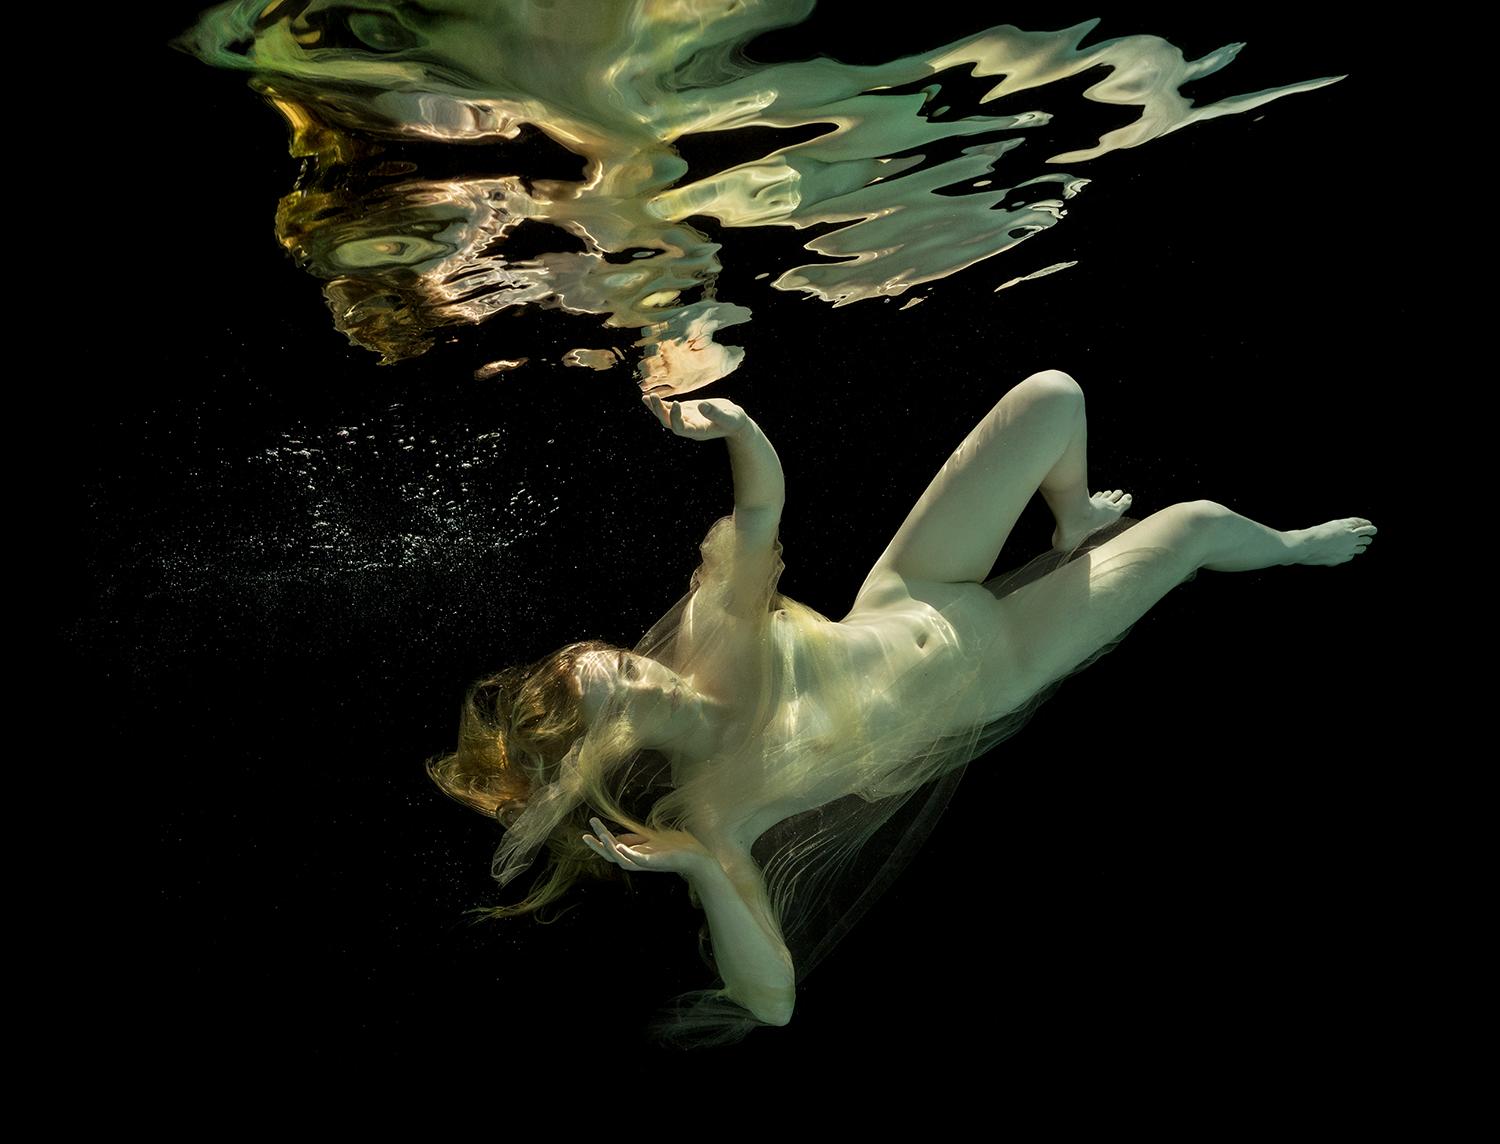 Alex Sher Nude Photograph - Danae and Zeus - underwater nude photograph - print on paper 27x35"